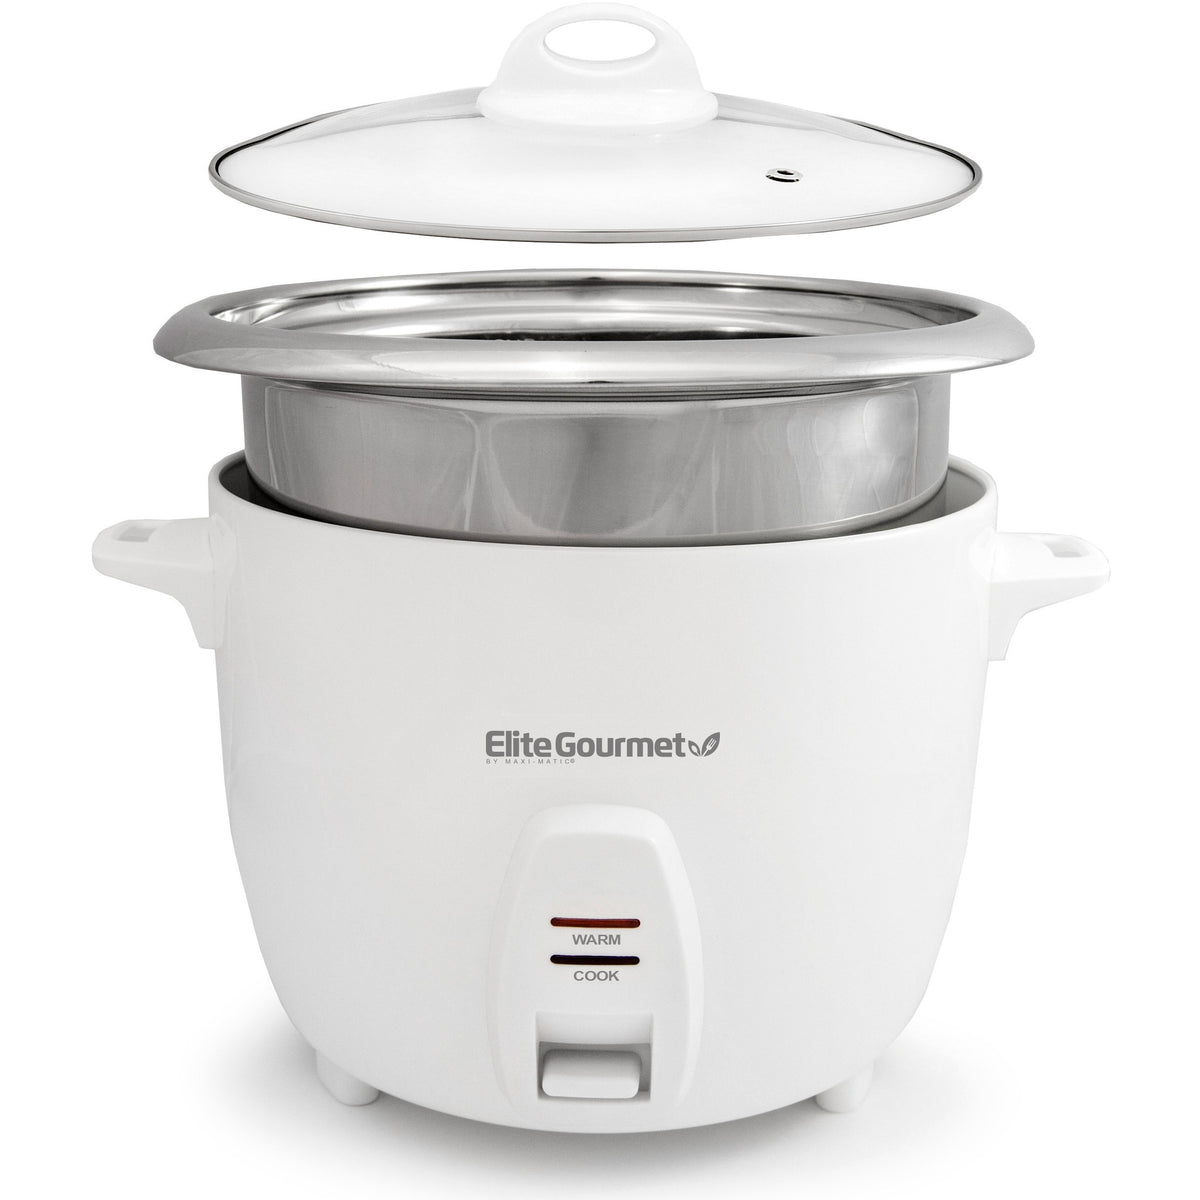 elite gourmet 10 cup rice cooker for Sale in Rialto, CA - OfferUp